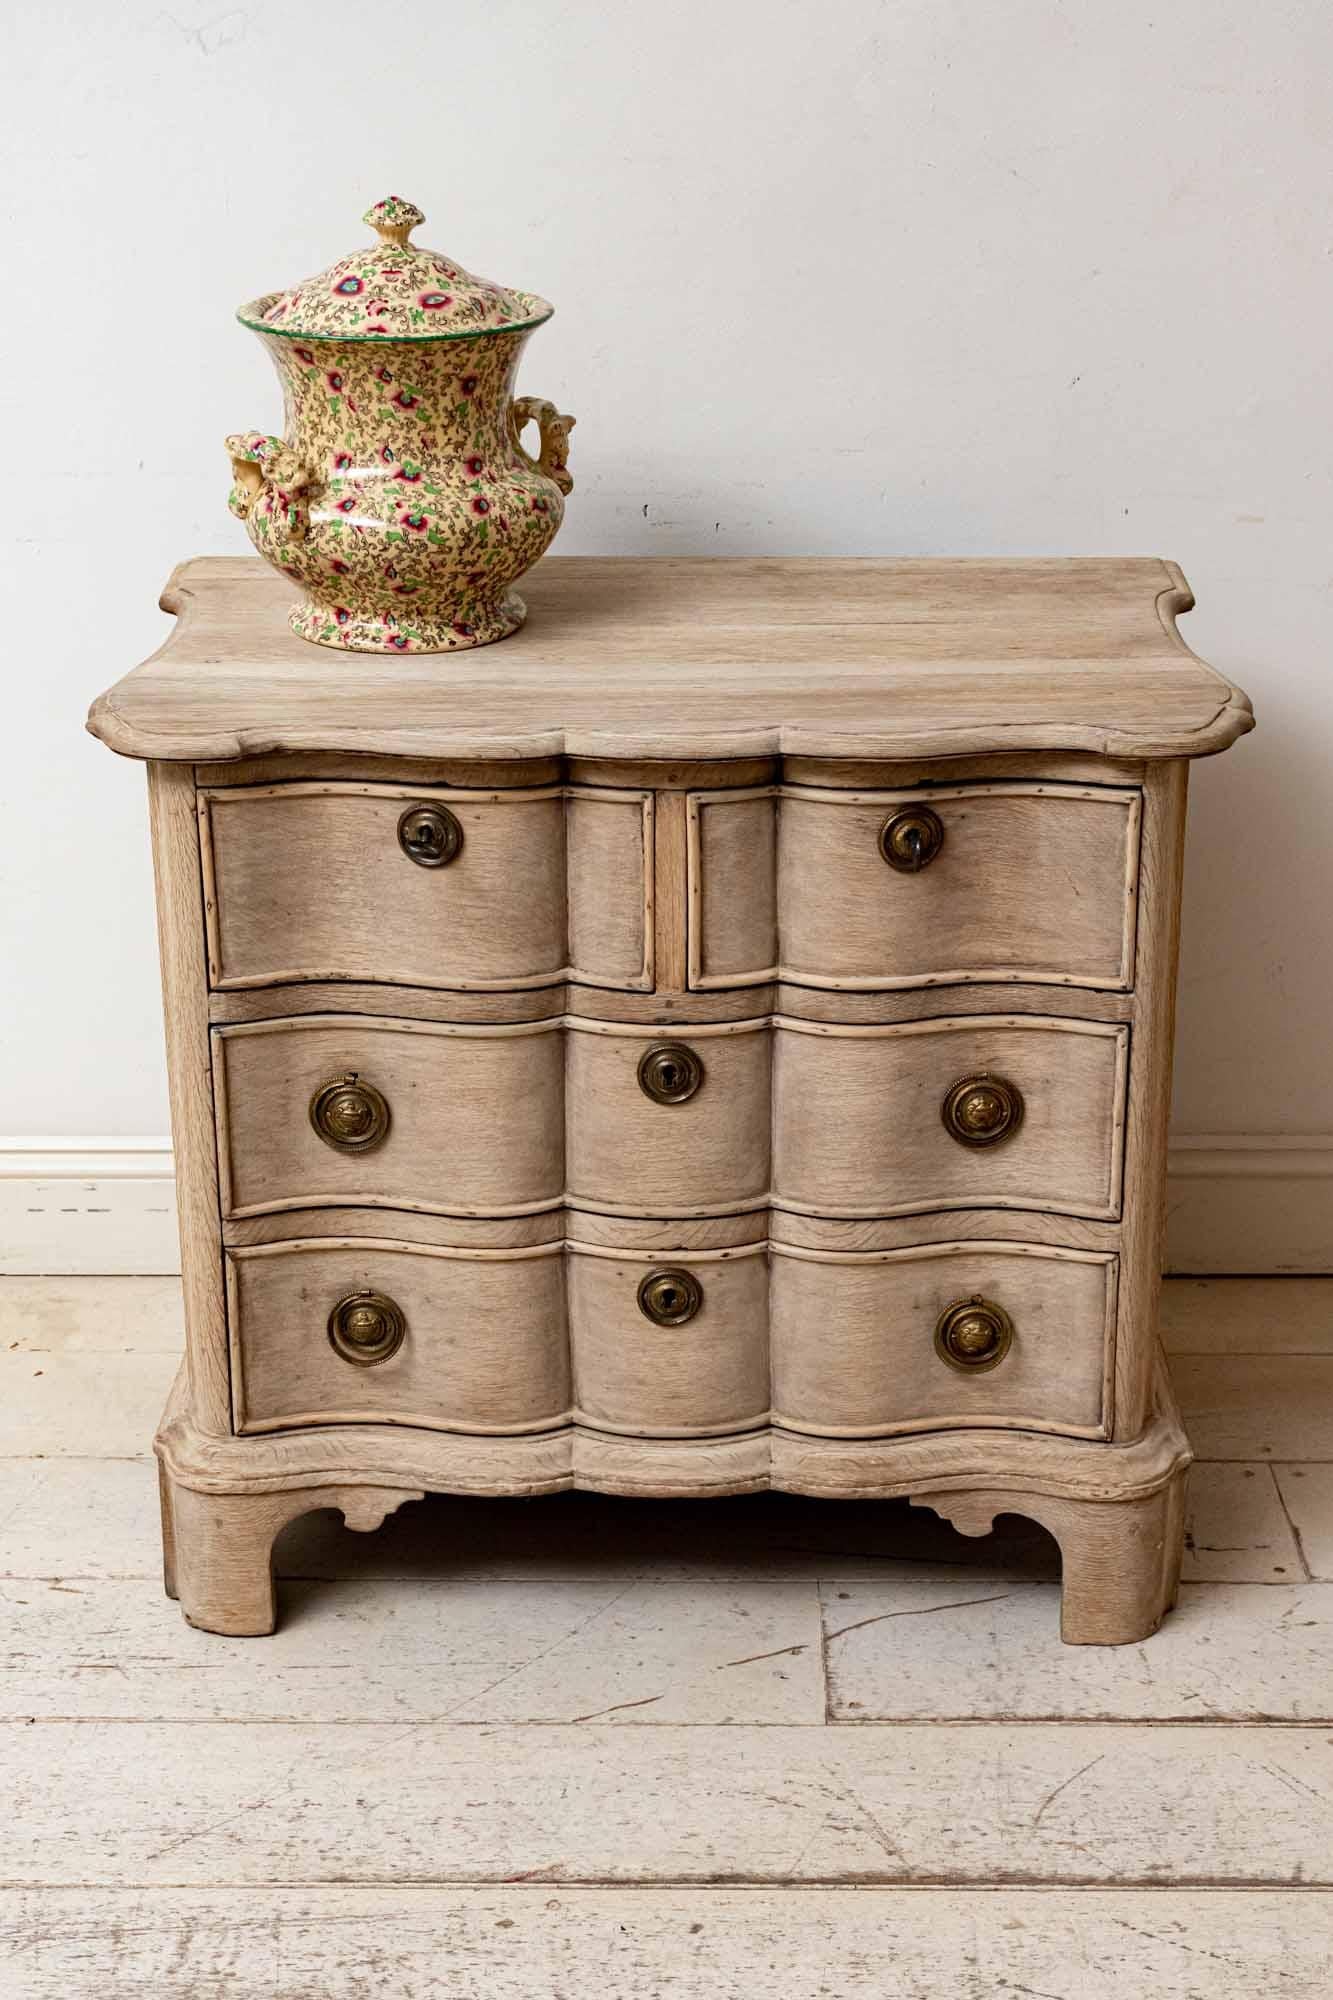 Late 18th century Dutch oak commode or chest of drawers which has been bleached and features an undulating front. Two short drawers sit at the top, each one with a brass key handle (with no locks), with two long drawers beneath each with two brass